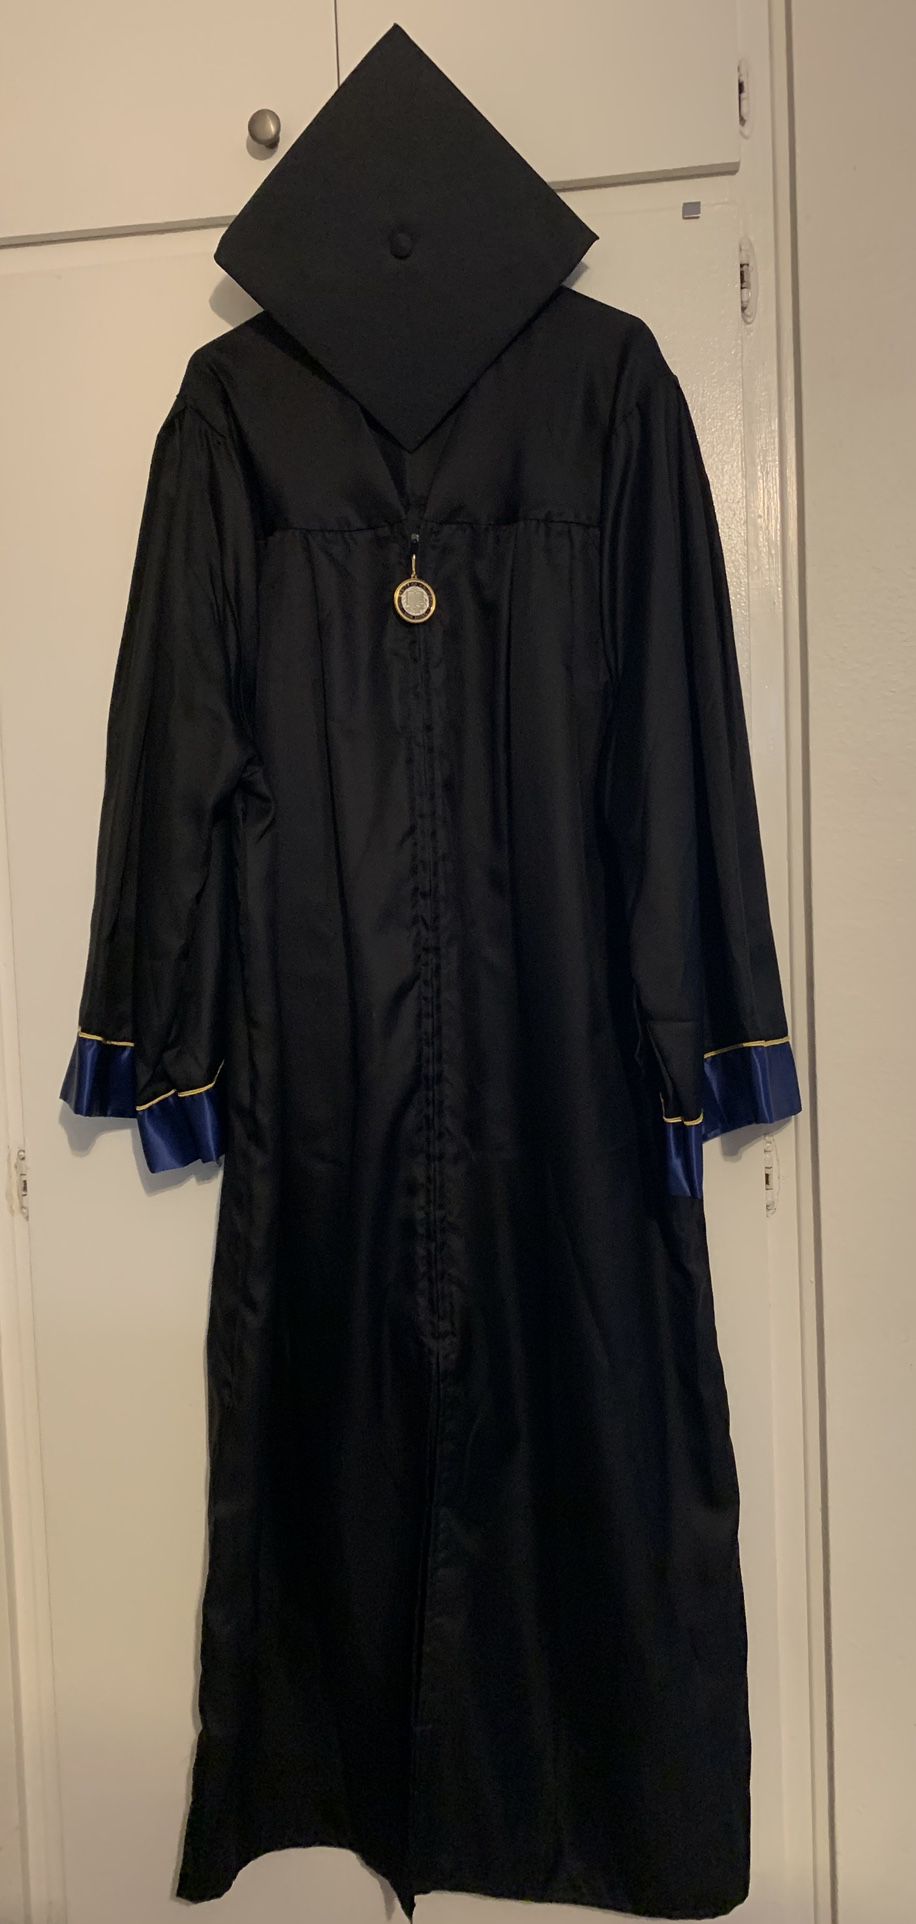 UCSD graduation gown and cap